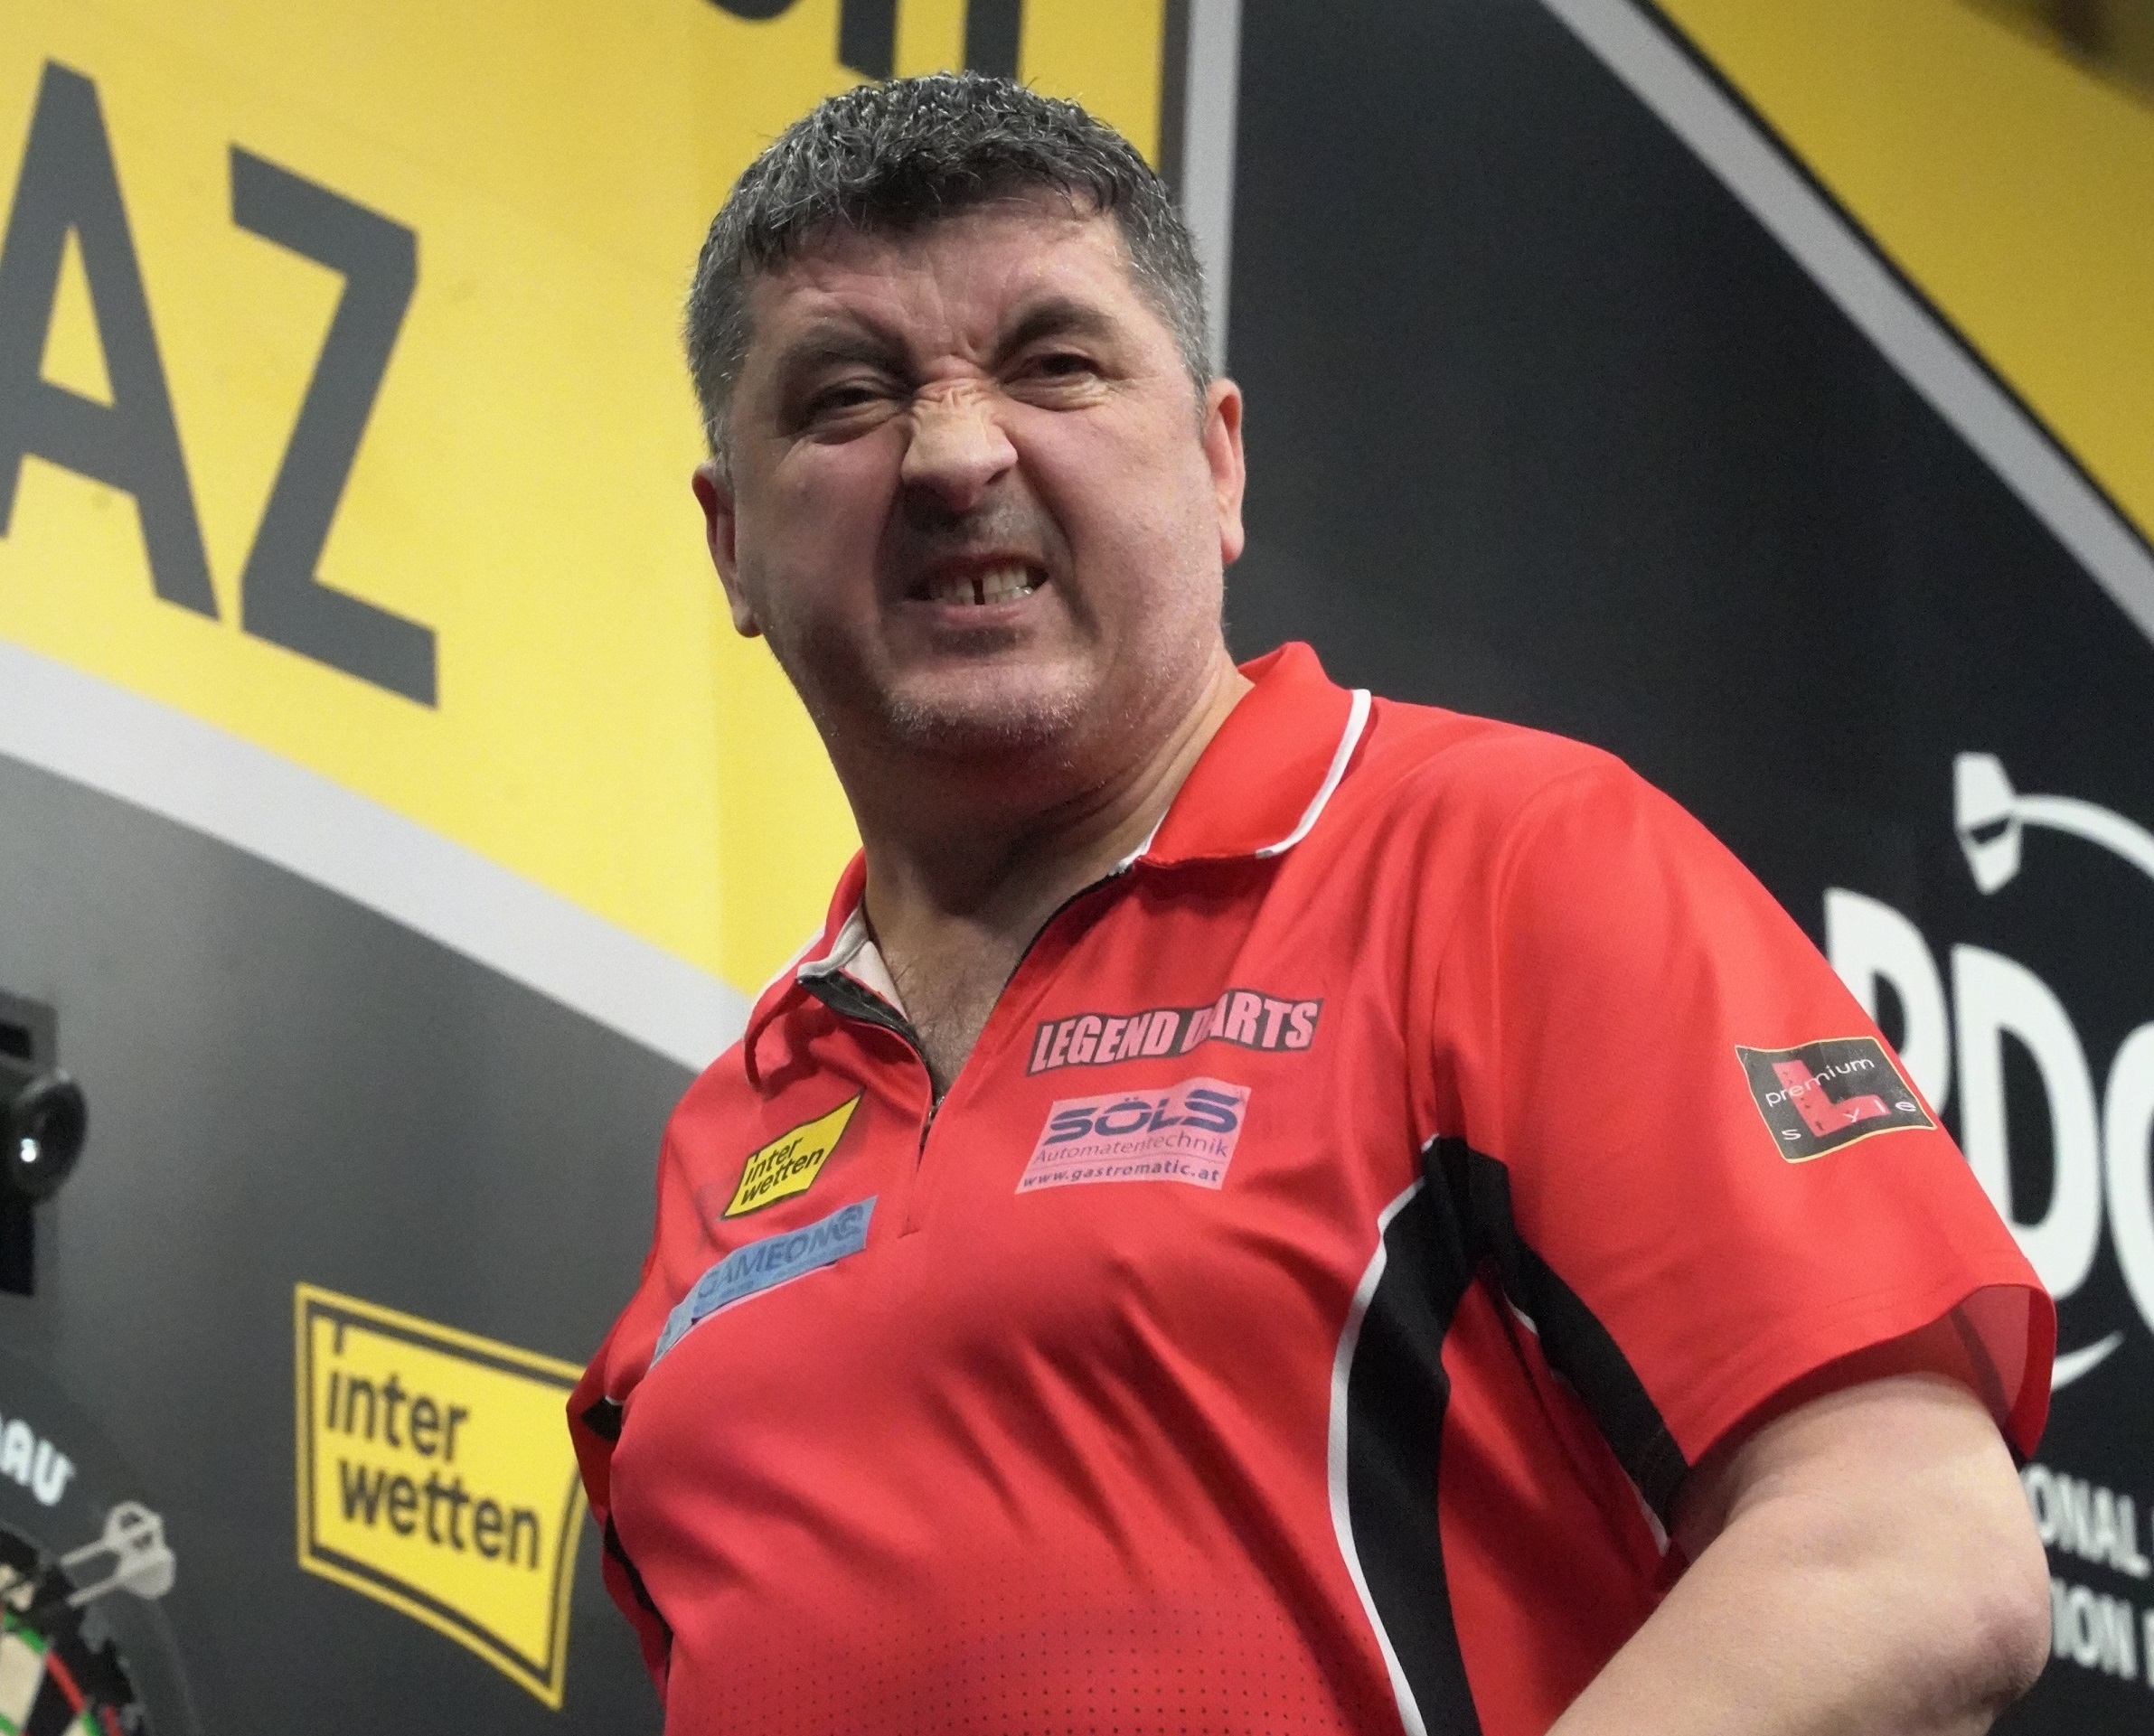 Home favourite Suljovic marches on at Interwetten Austrian Darts Open PDC